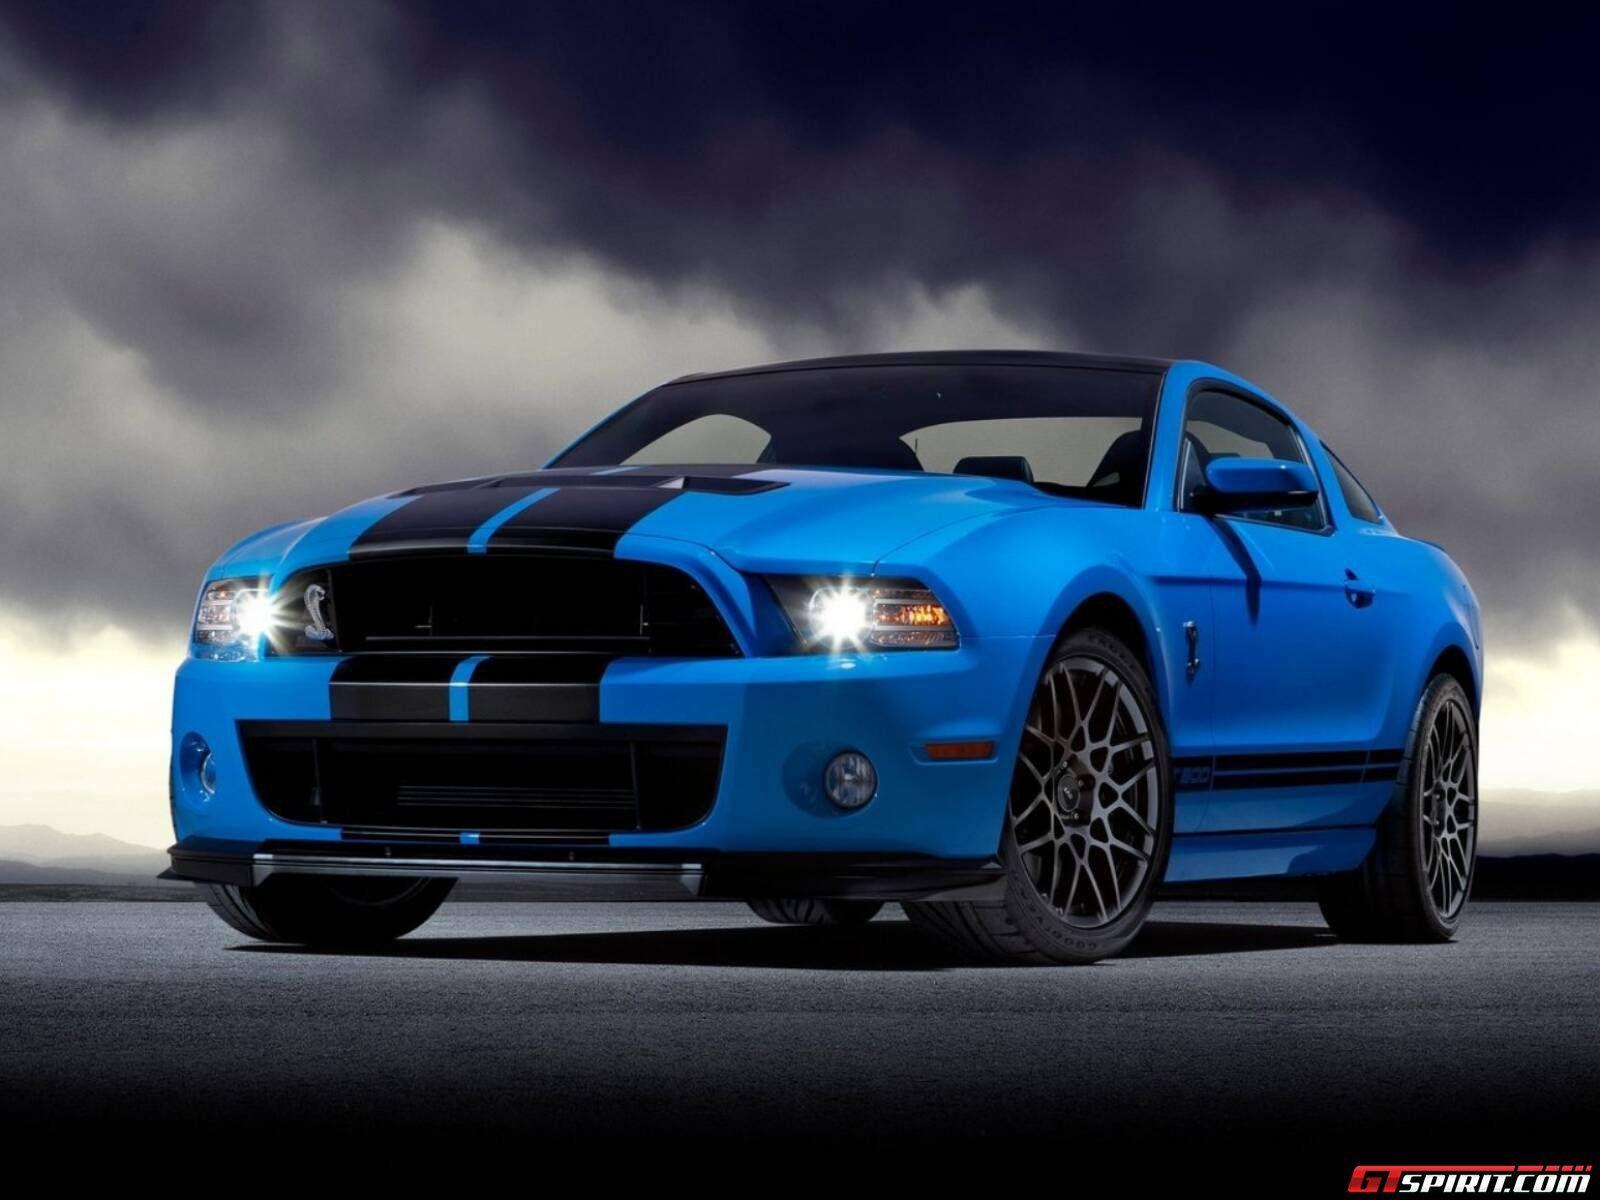 Ford Mustang Shelby GT500 HD Wallpaper. Background